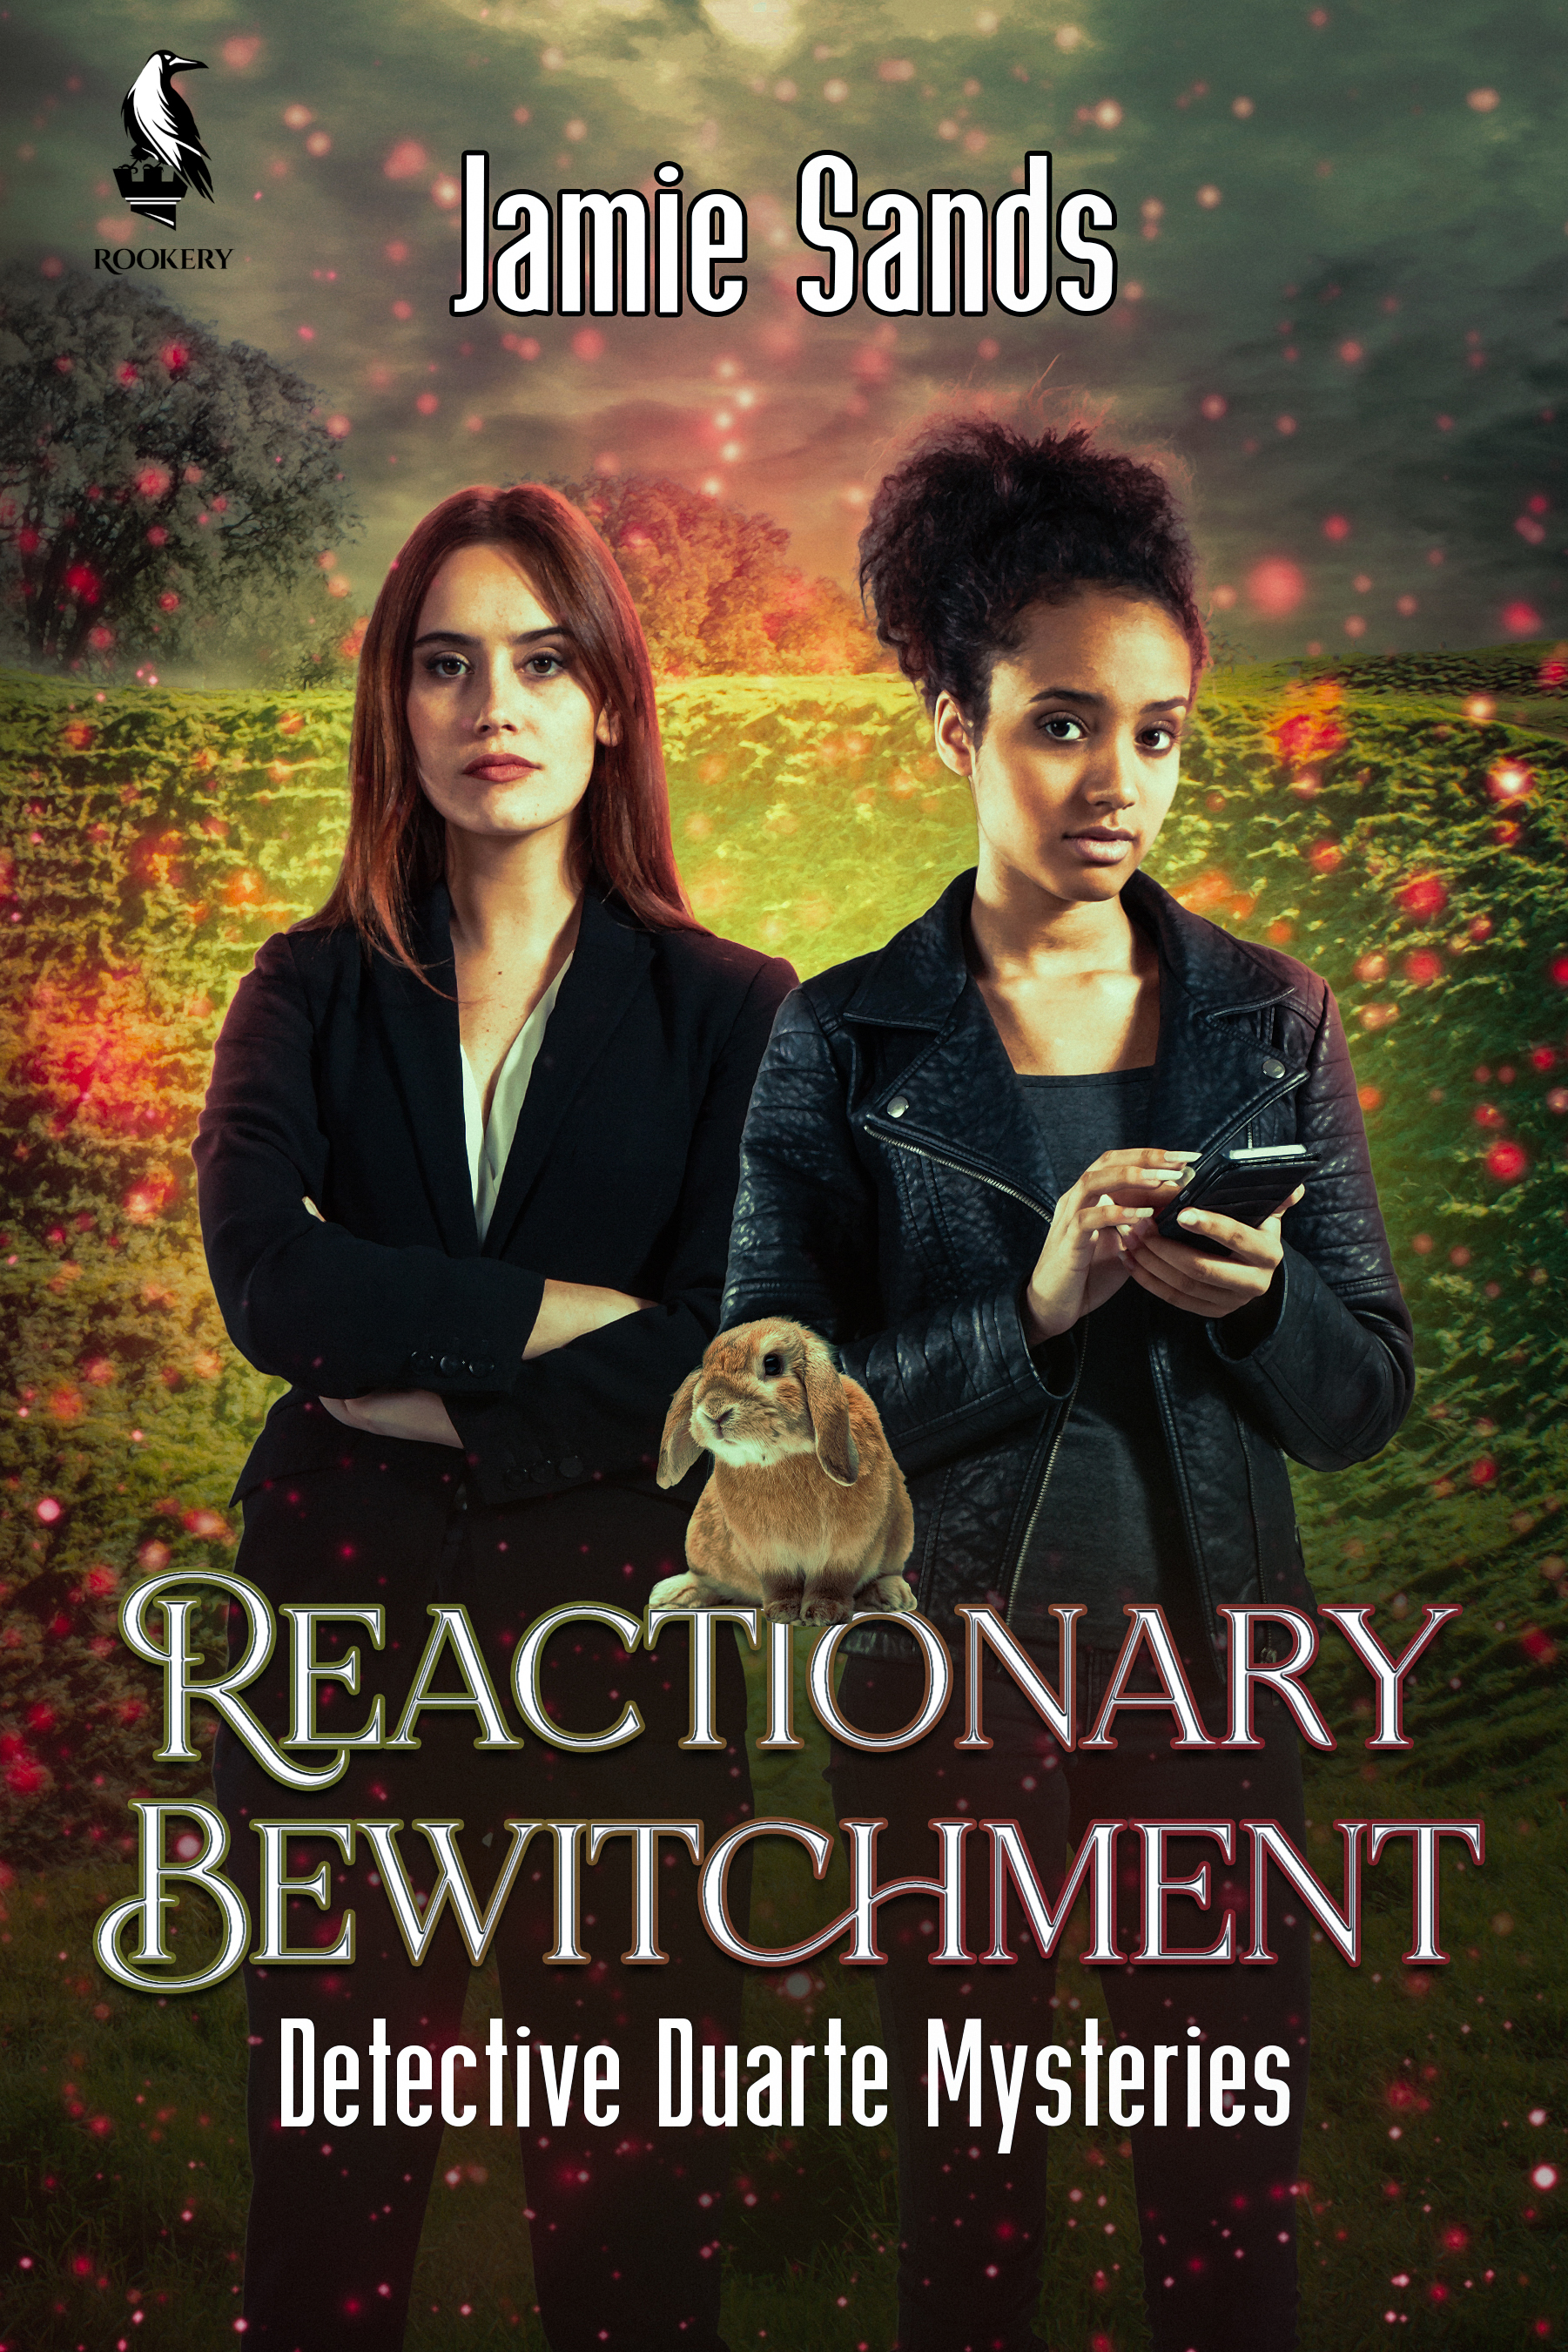 Reactionary Bewitchment